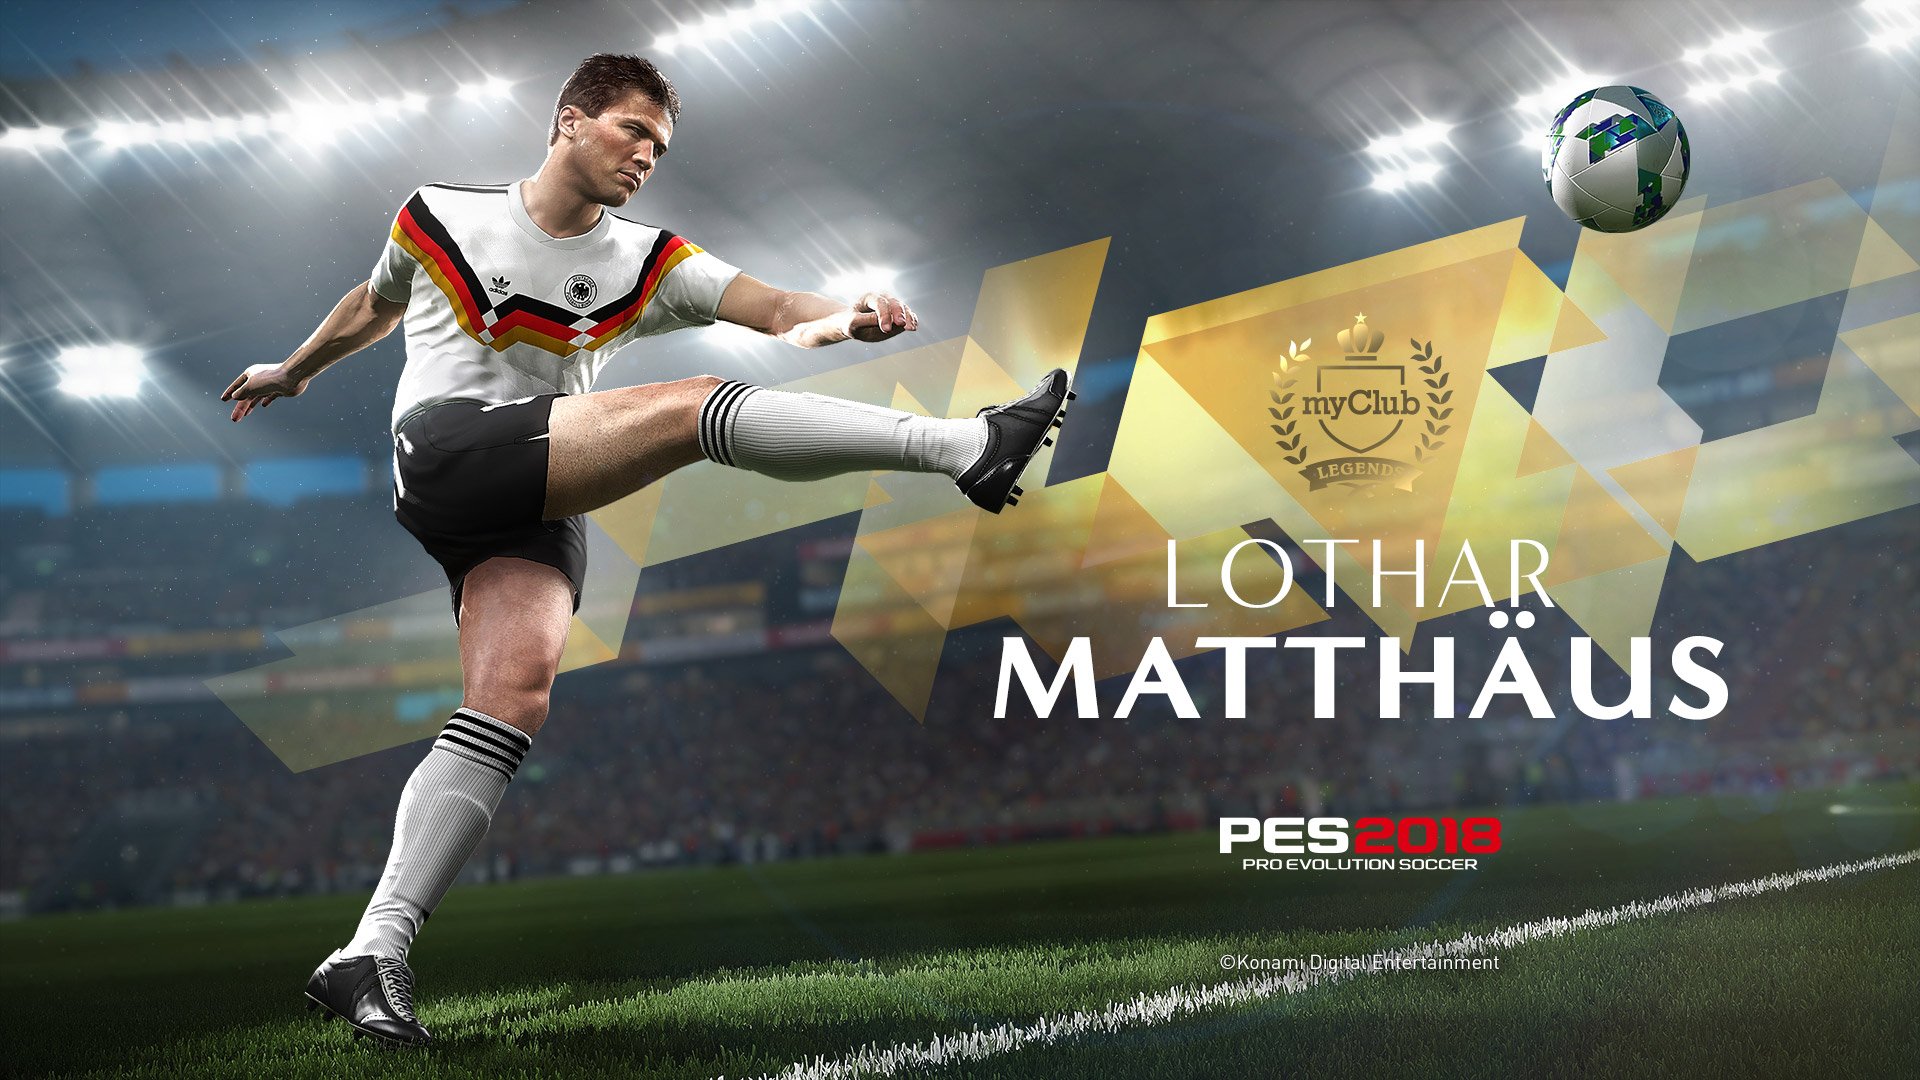 eFootball в Twitter: Lothar Matthäus. Oliver Kahn. German Legends. Available now in and #PES2018Mobile. Coming to #PES2018 this Thursday!